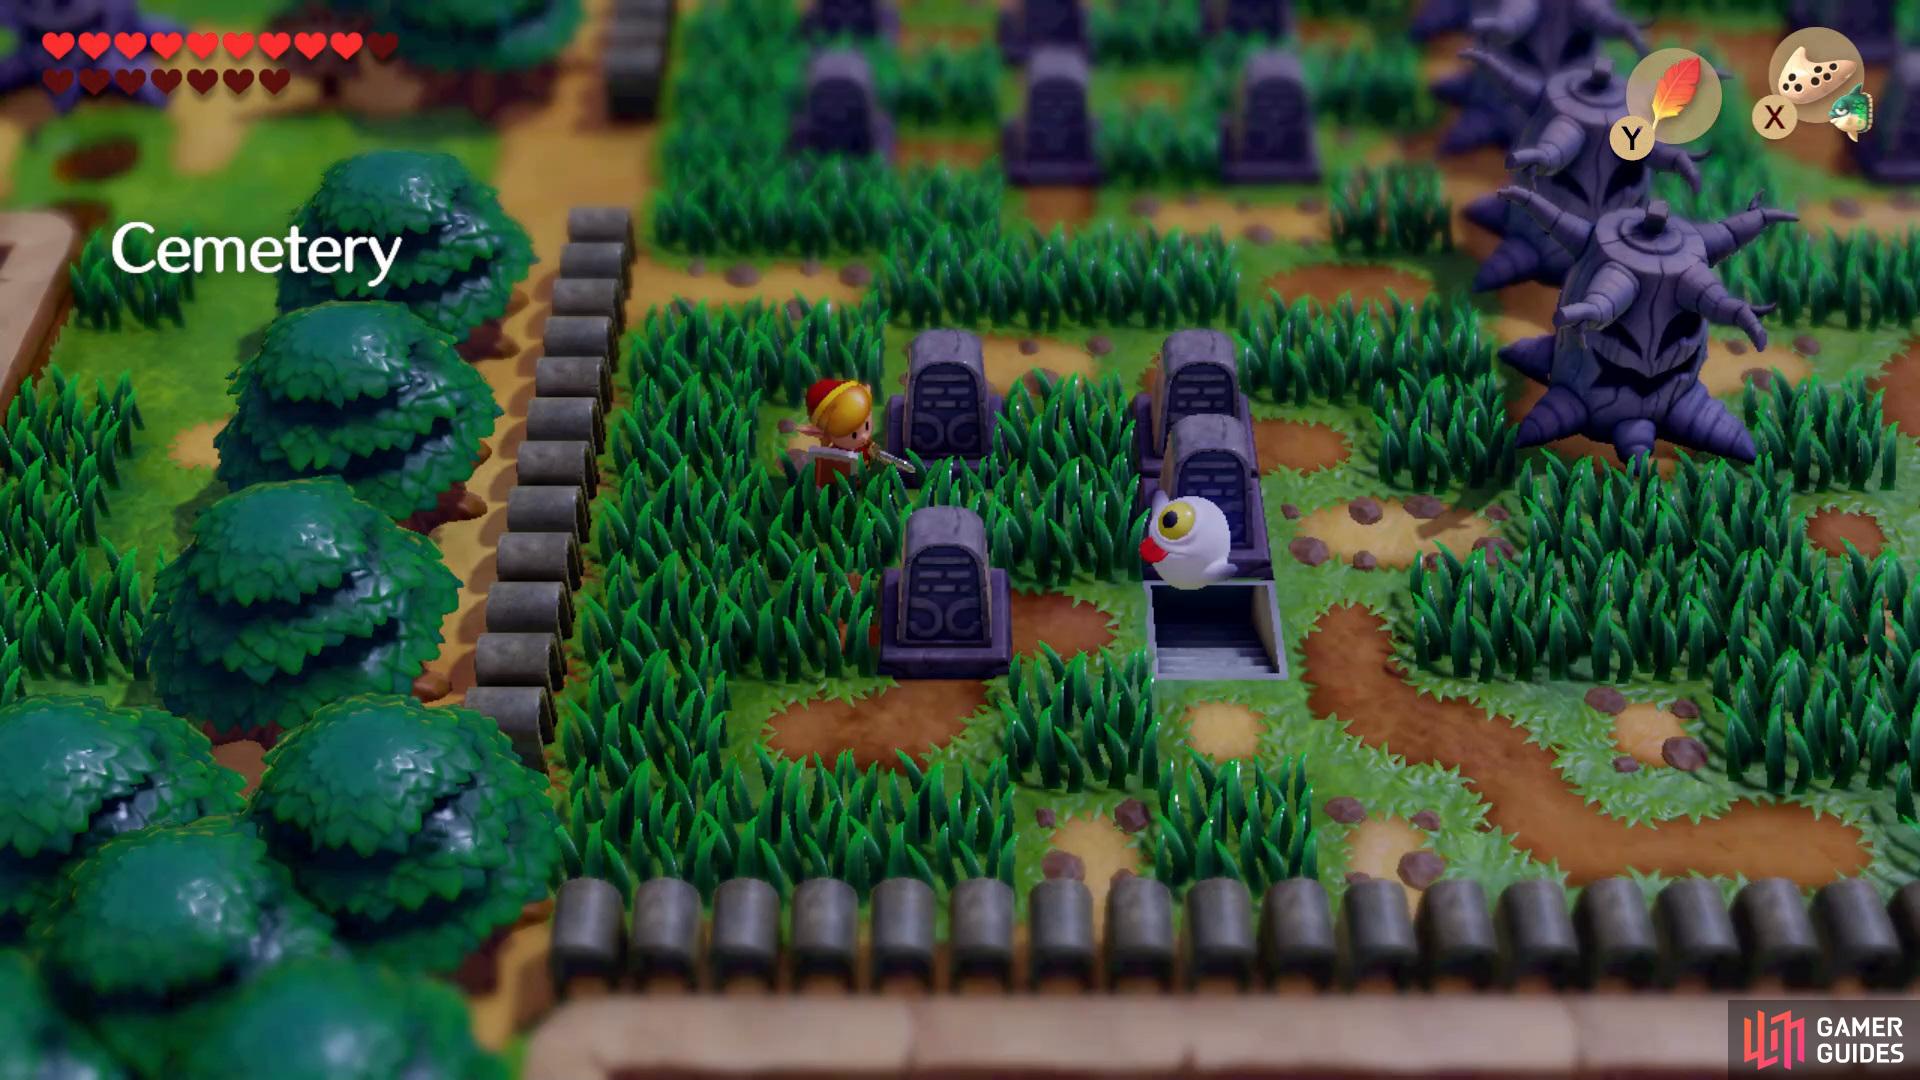 These ghosts will appear when you’re in the Cemetery, simply just swipe them with your Sword.